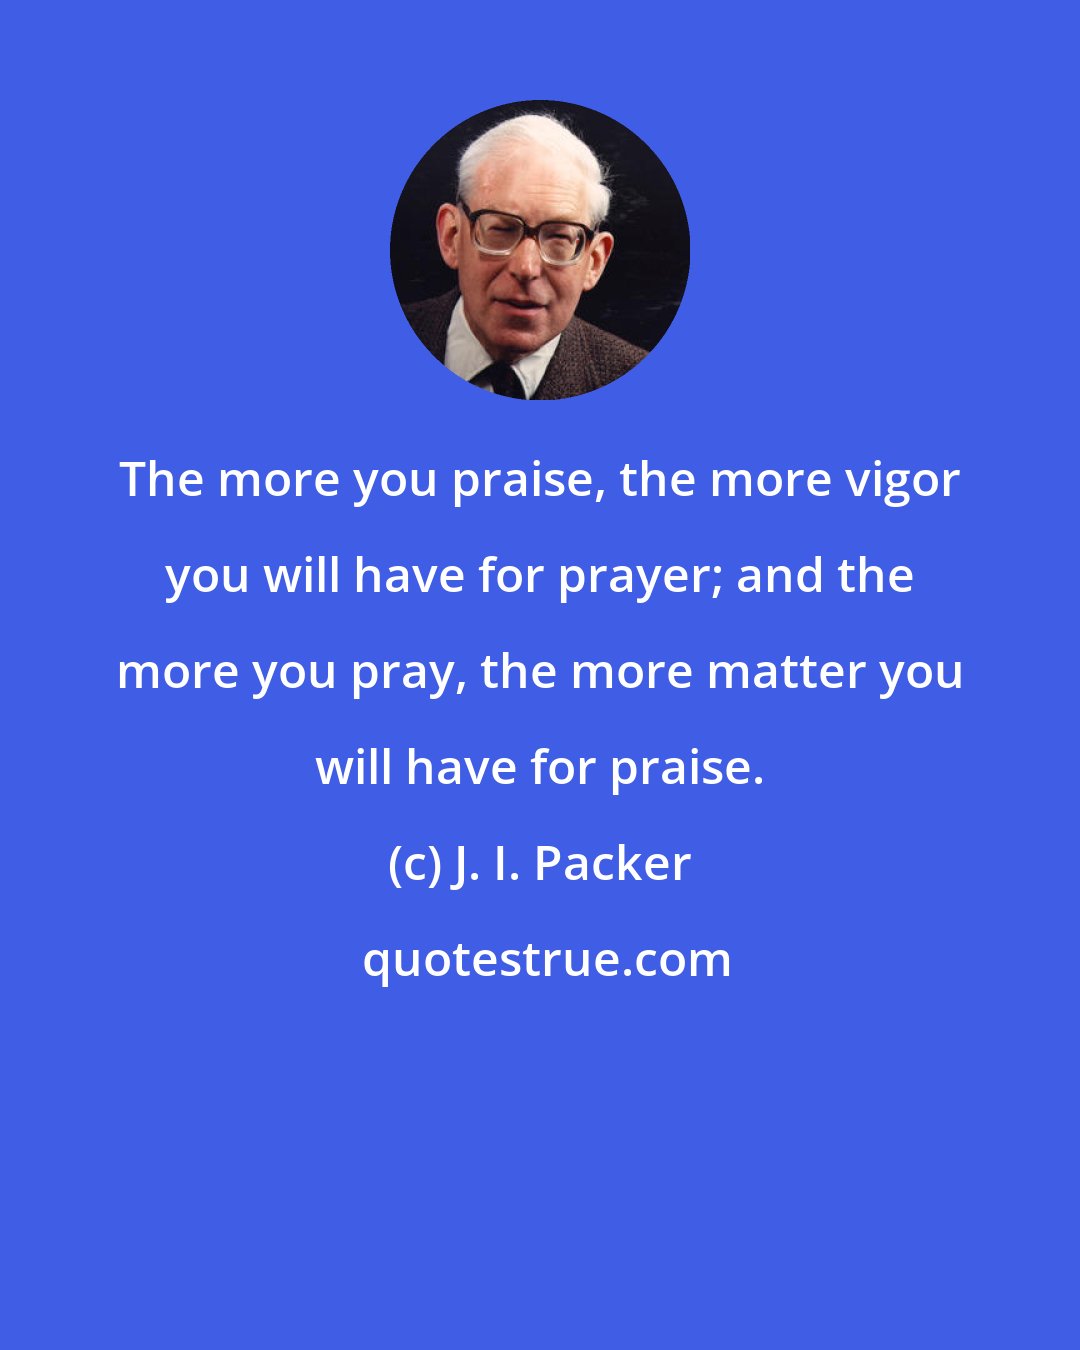 J. I. Packer: The more you praise, the more vigor you will have for prayer; and the more you pray, the more matter you will have for praise.